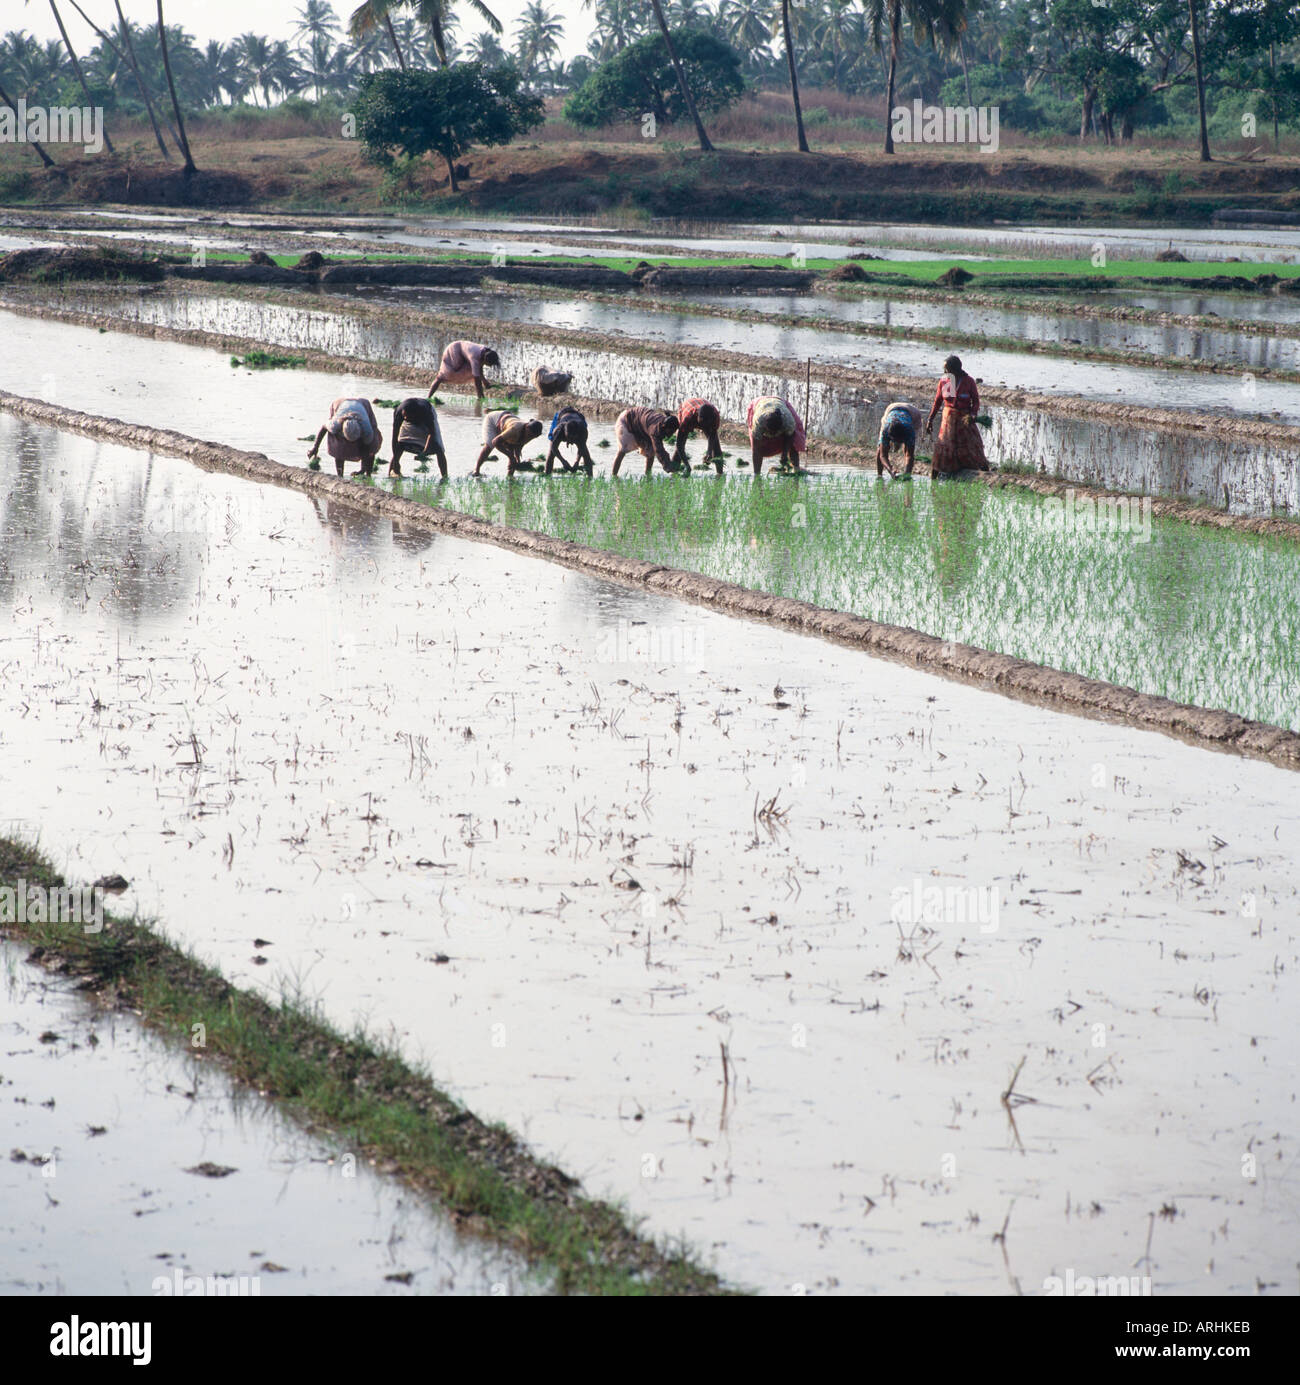 People working in paddy fields in the south of Goa, India Stock Photo